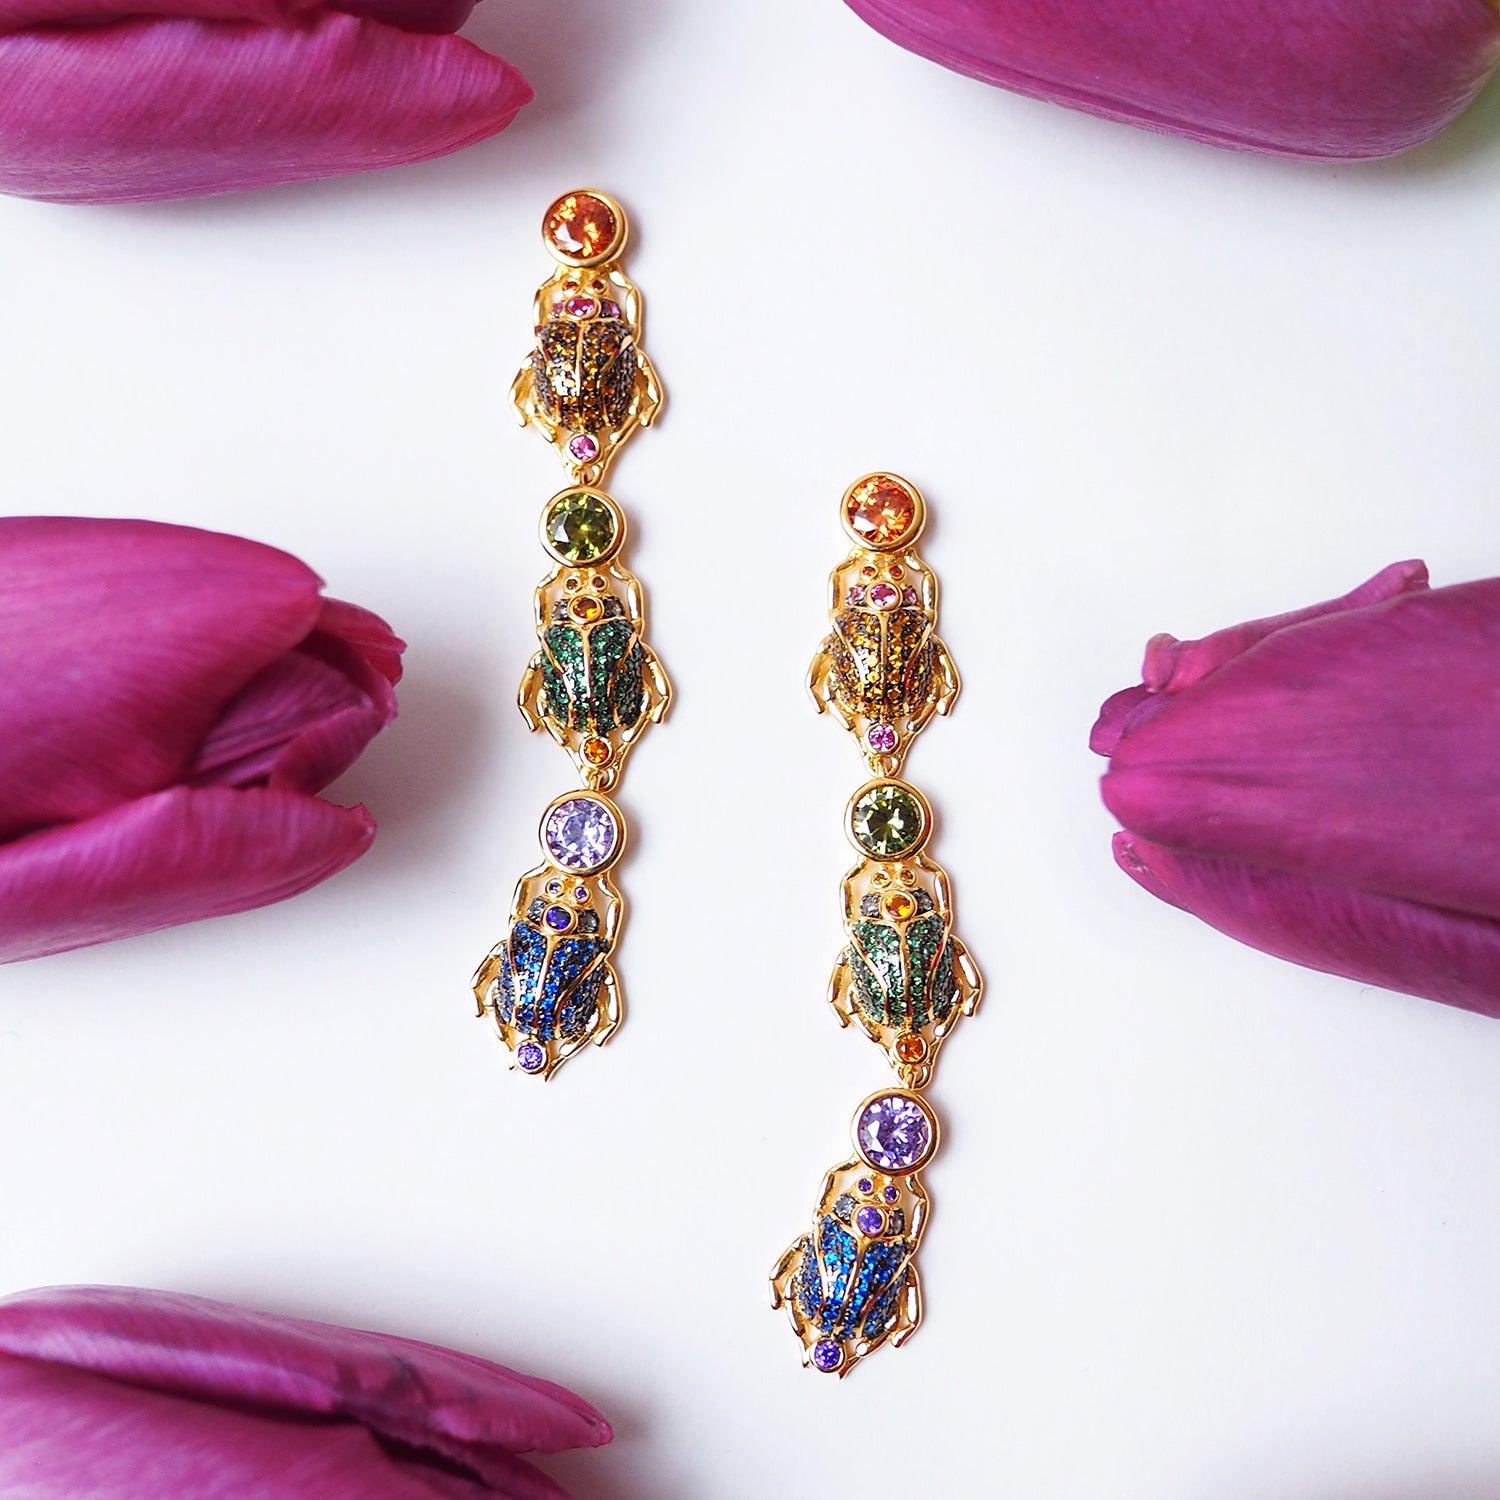 sliver gold plated beetles scarab earrings with colourful CUBIC ZIRCONIA gems stone from Hong Kong